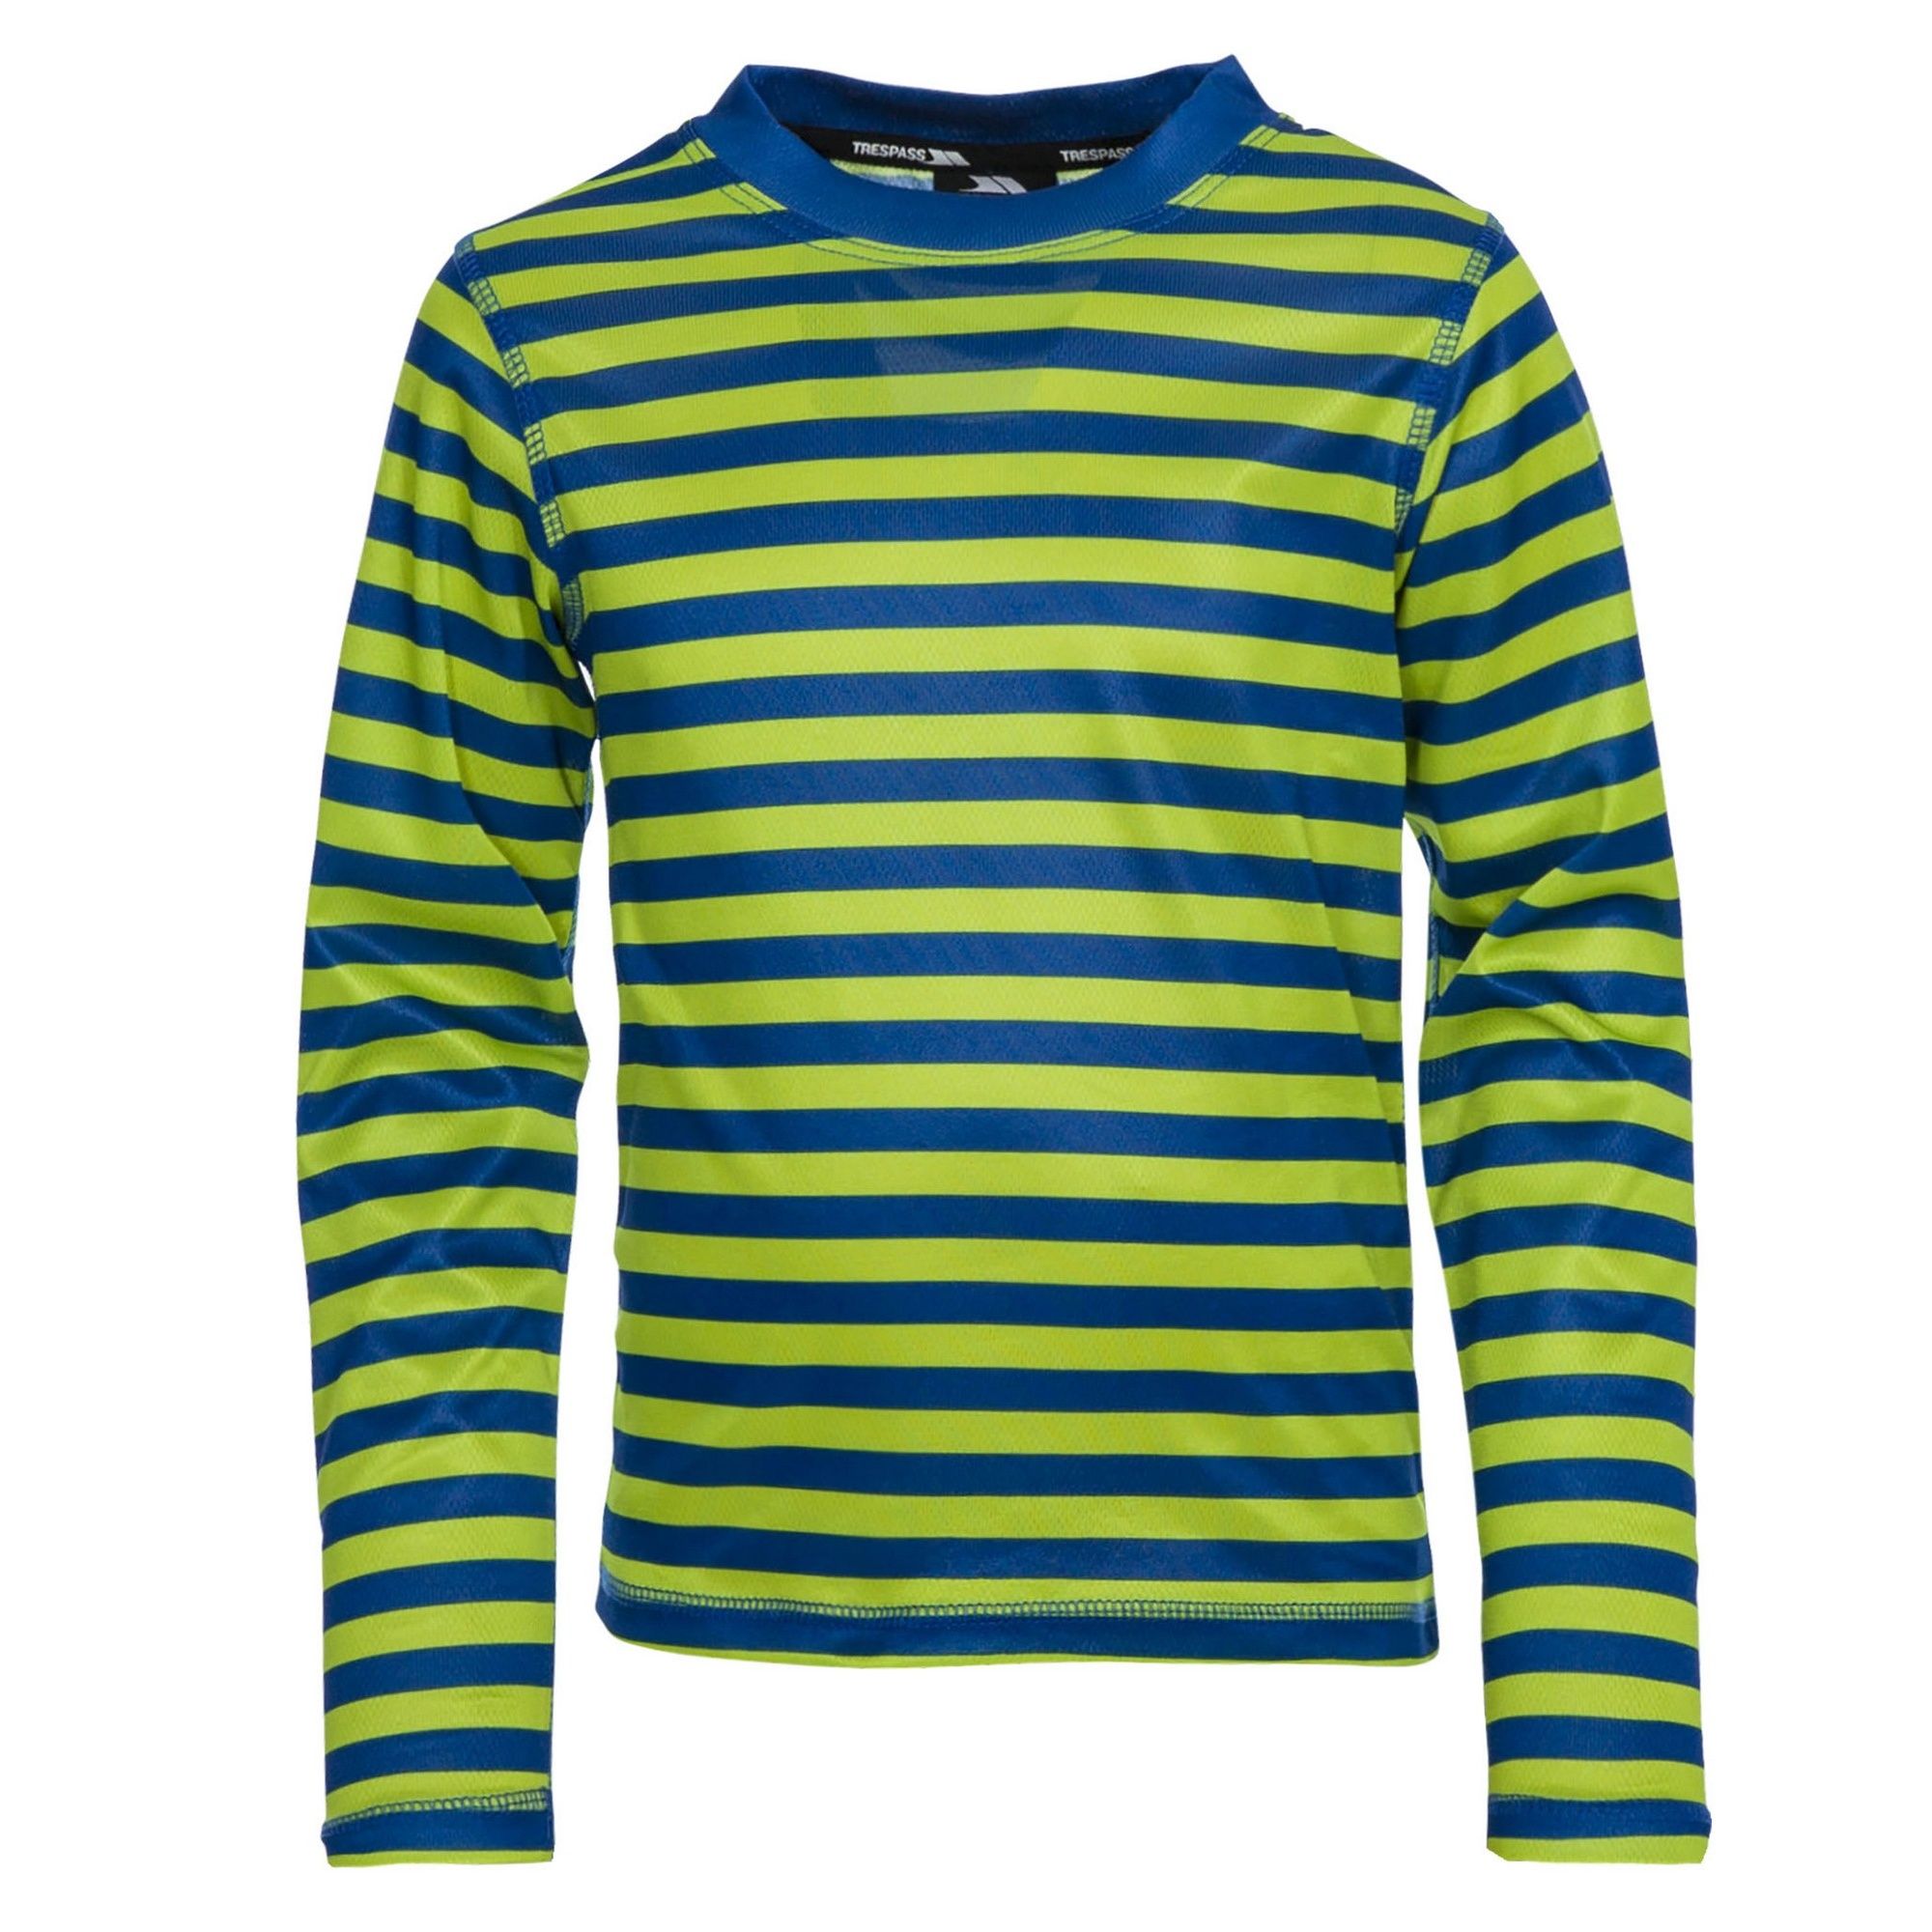 Long sleeves. Round neck. Flat seams for comfort. Branded box packaging.  coating. Wicking. Quick dry. 100% Polyester. Trespass Childrens Chest Sizing (approx): 2/3 Years - 21in/53cm, 3/4 Years - 22in/56cm, 5/6 Years - 24in/61cm, 7/8 Years - 26in/66cm, 9/10 Years - 28in/71cm, 11/12 Years - 31in/79cm.